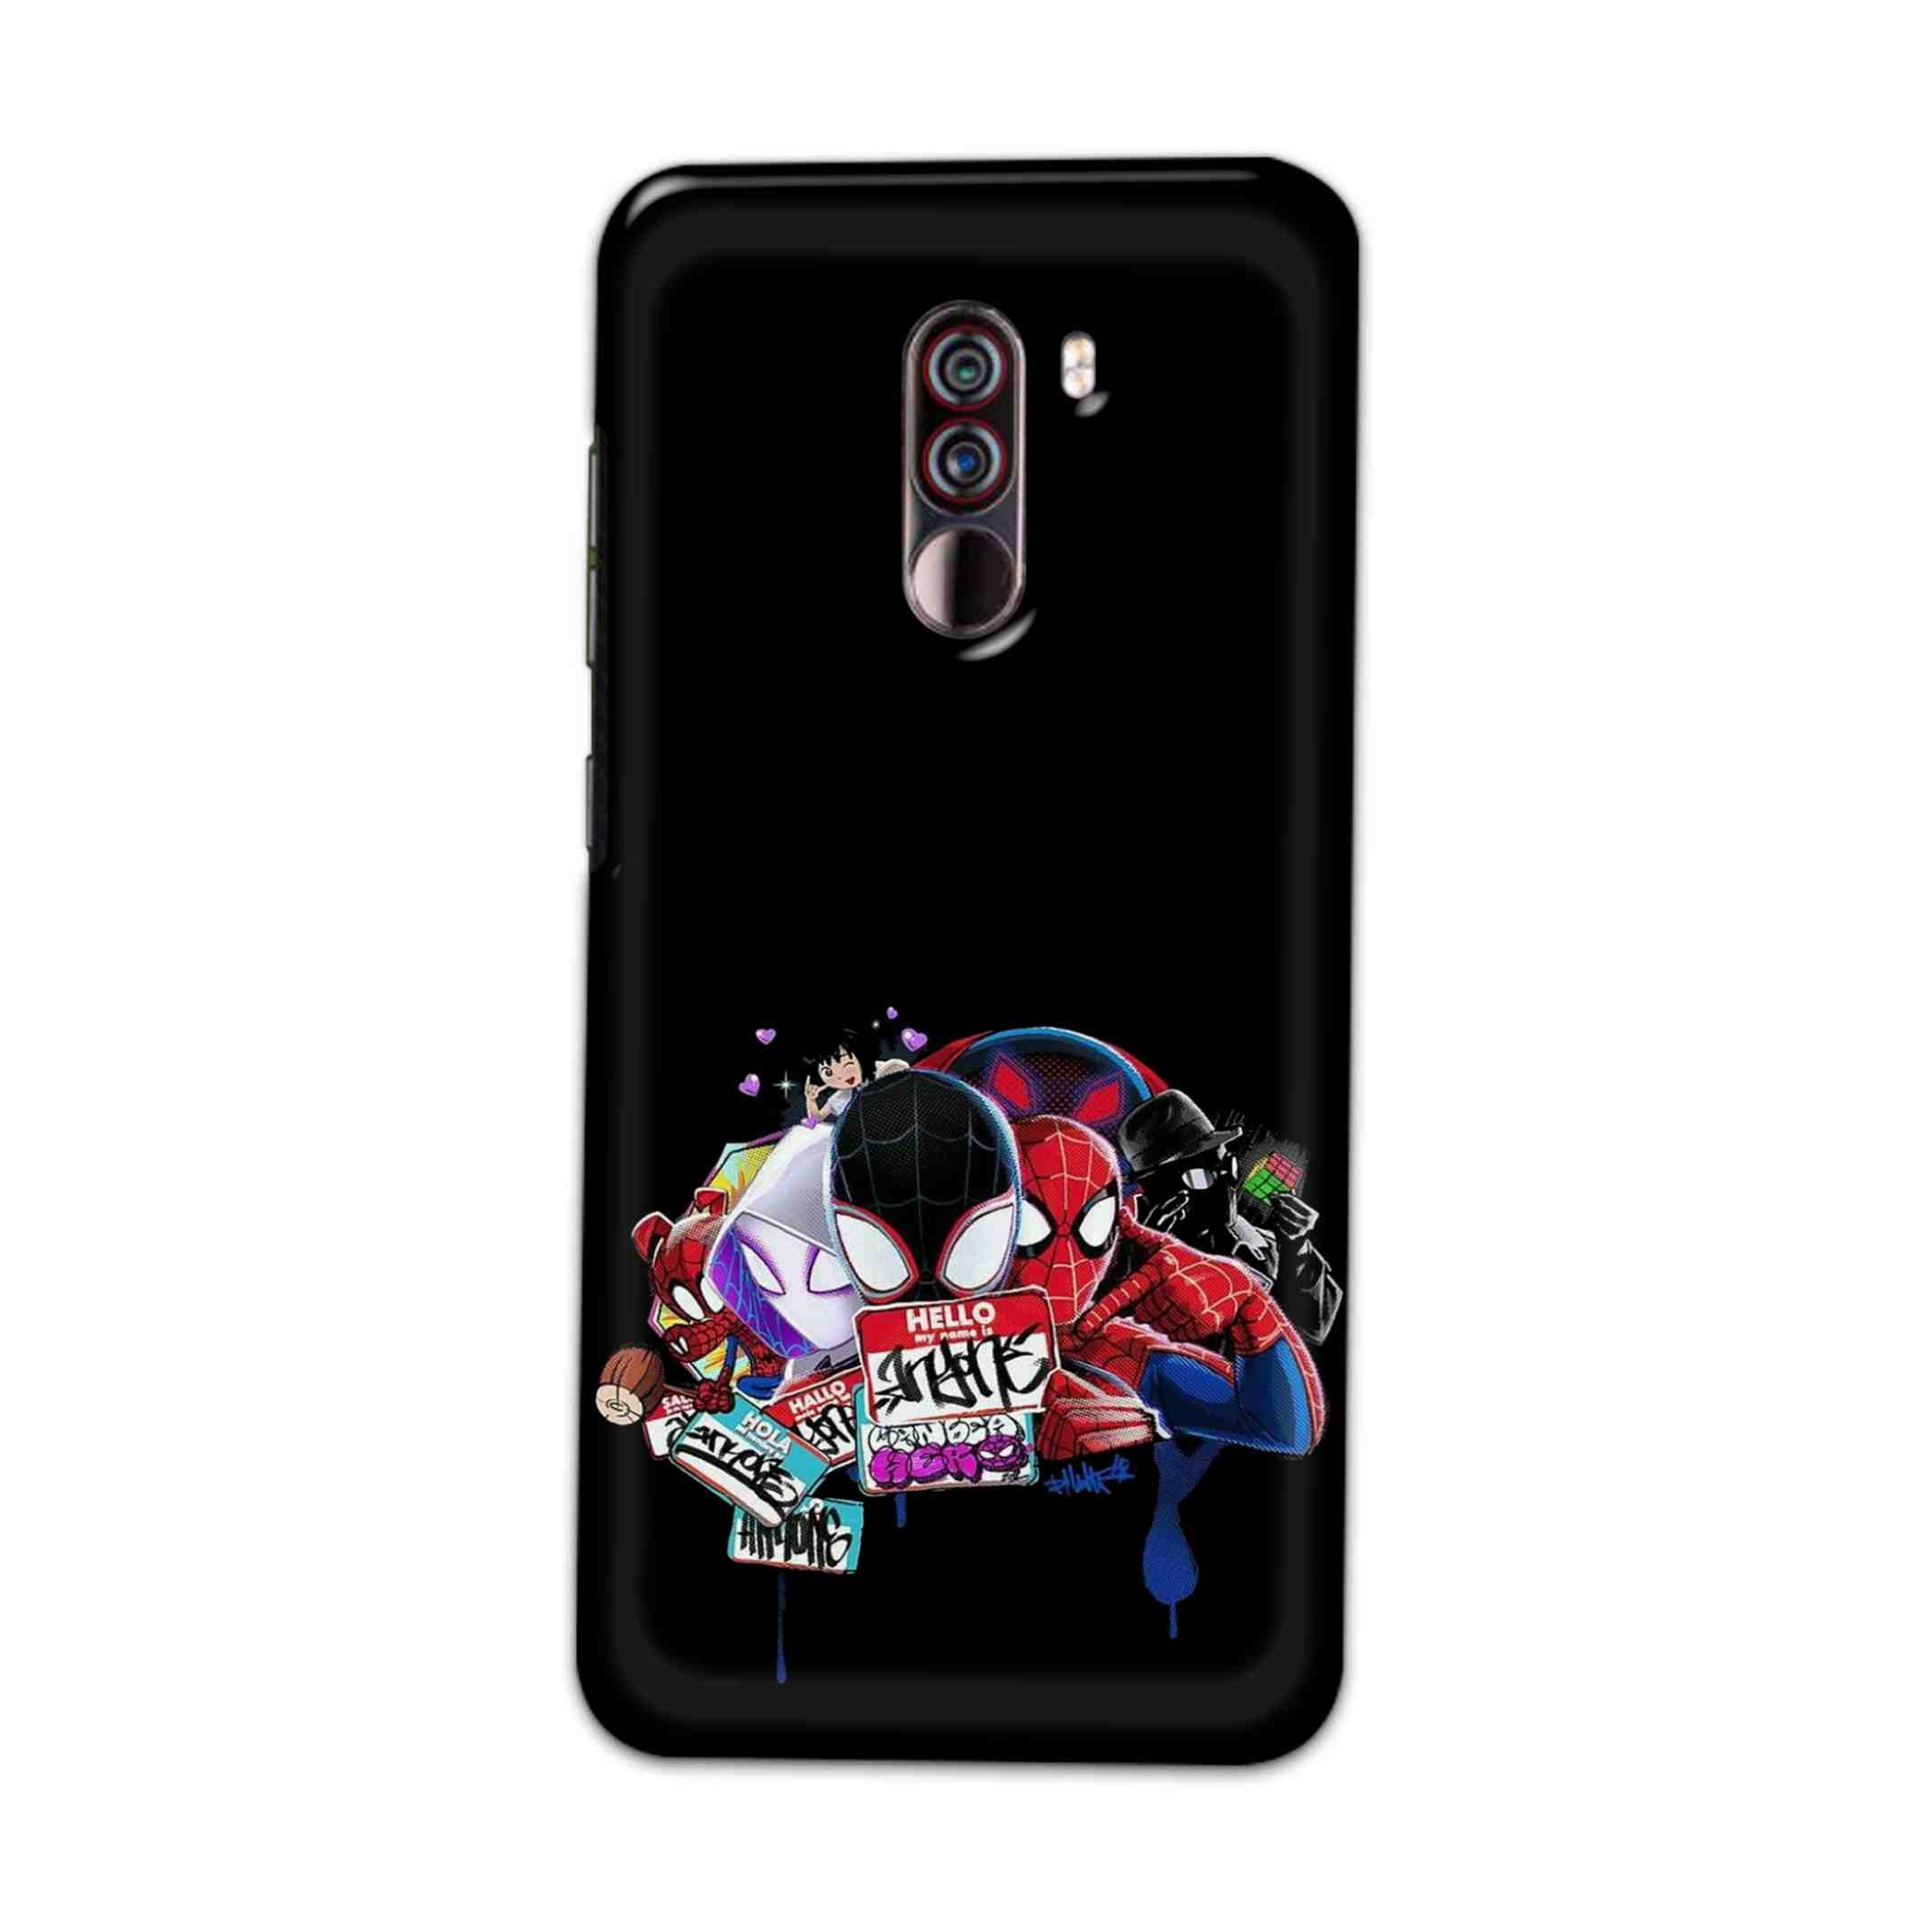 Buy Miles Morales Hard Back Mobile Phone Case Cover For Xiaomi Pocophone F1 Online